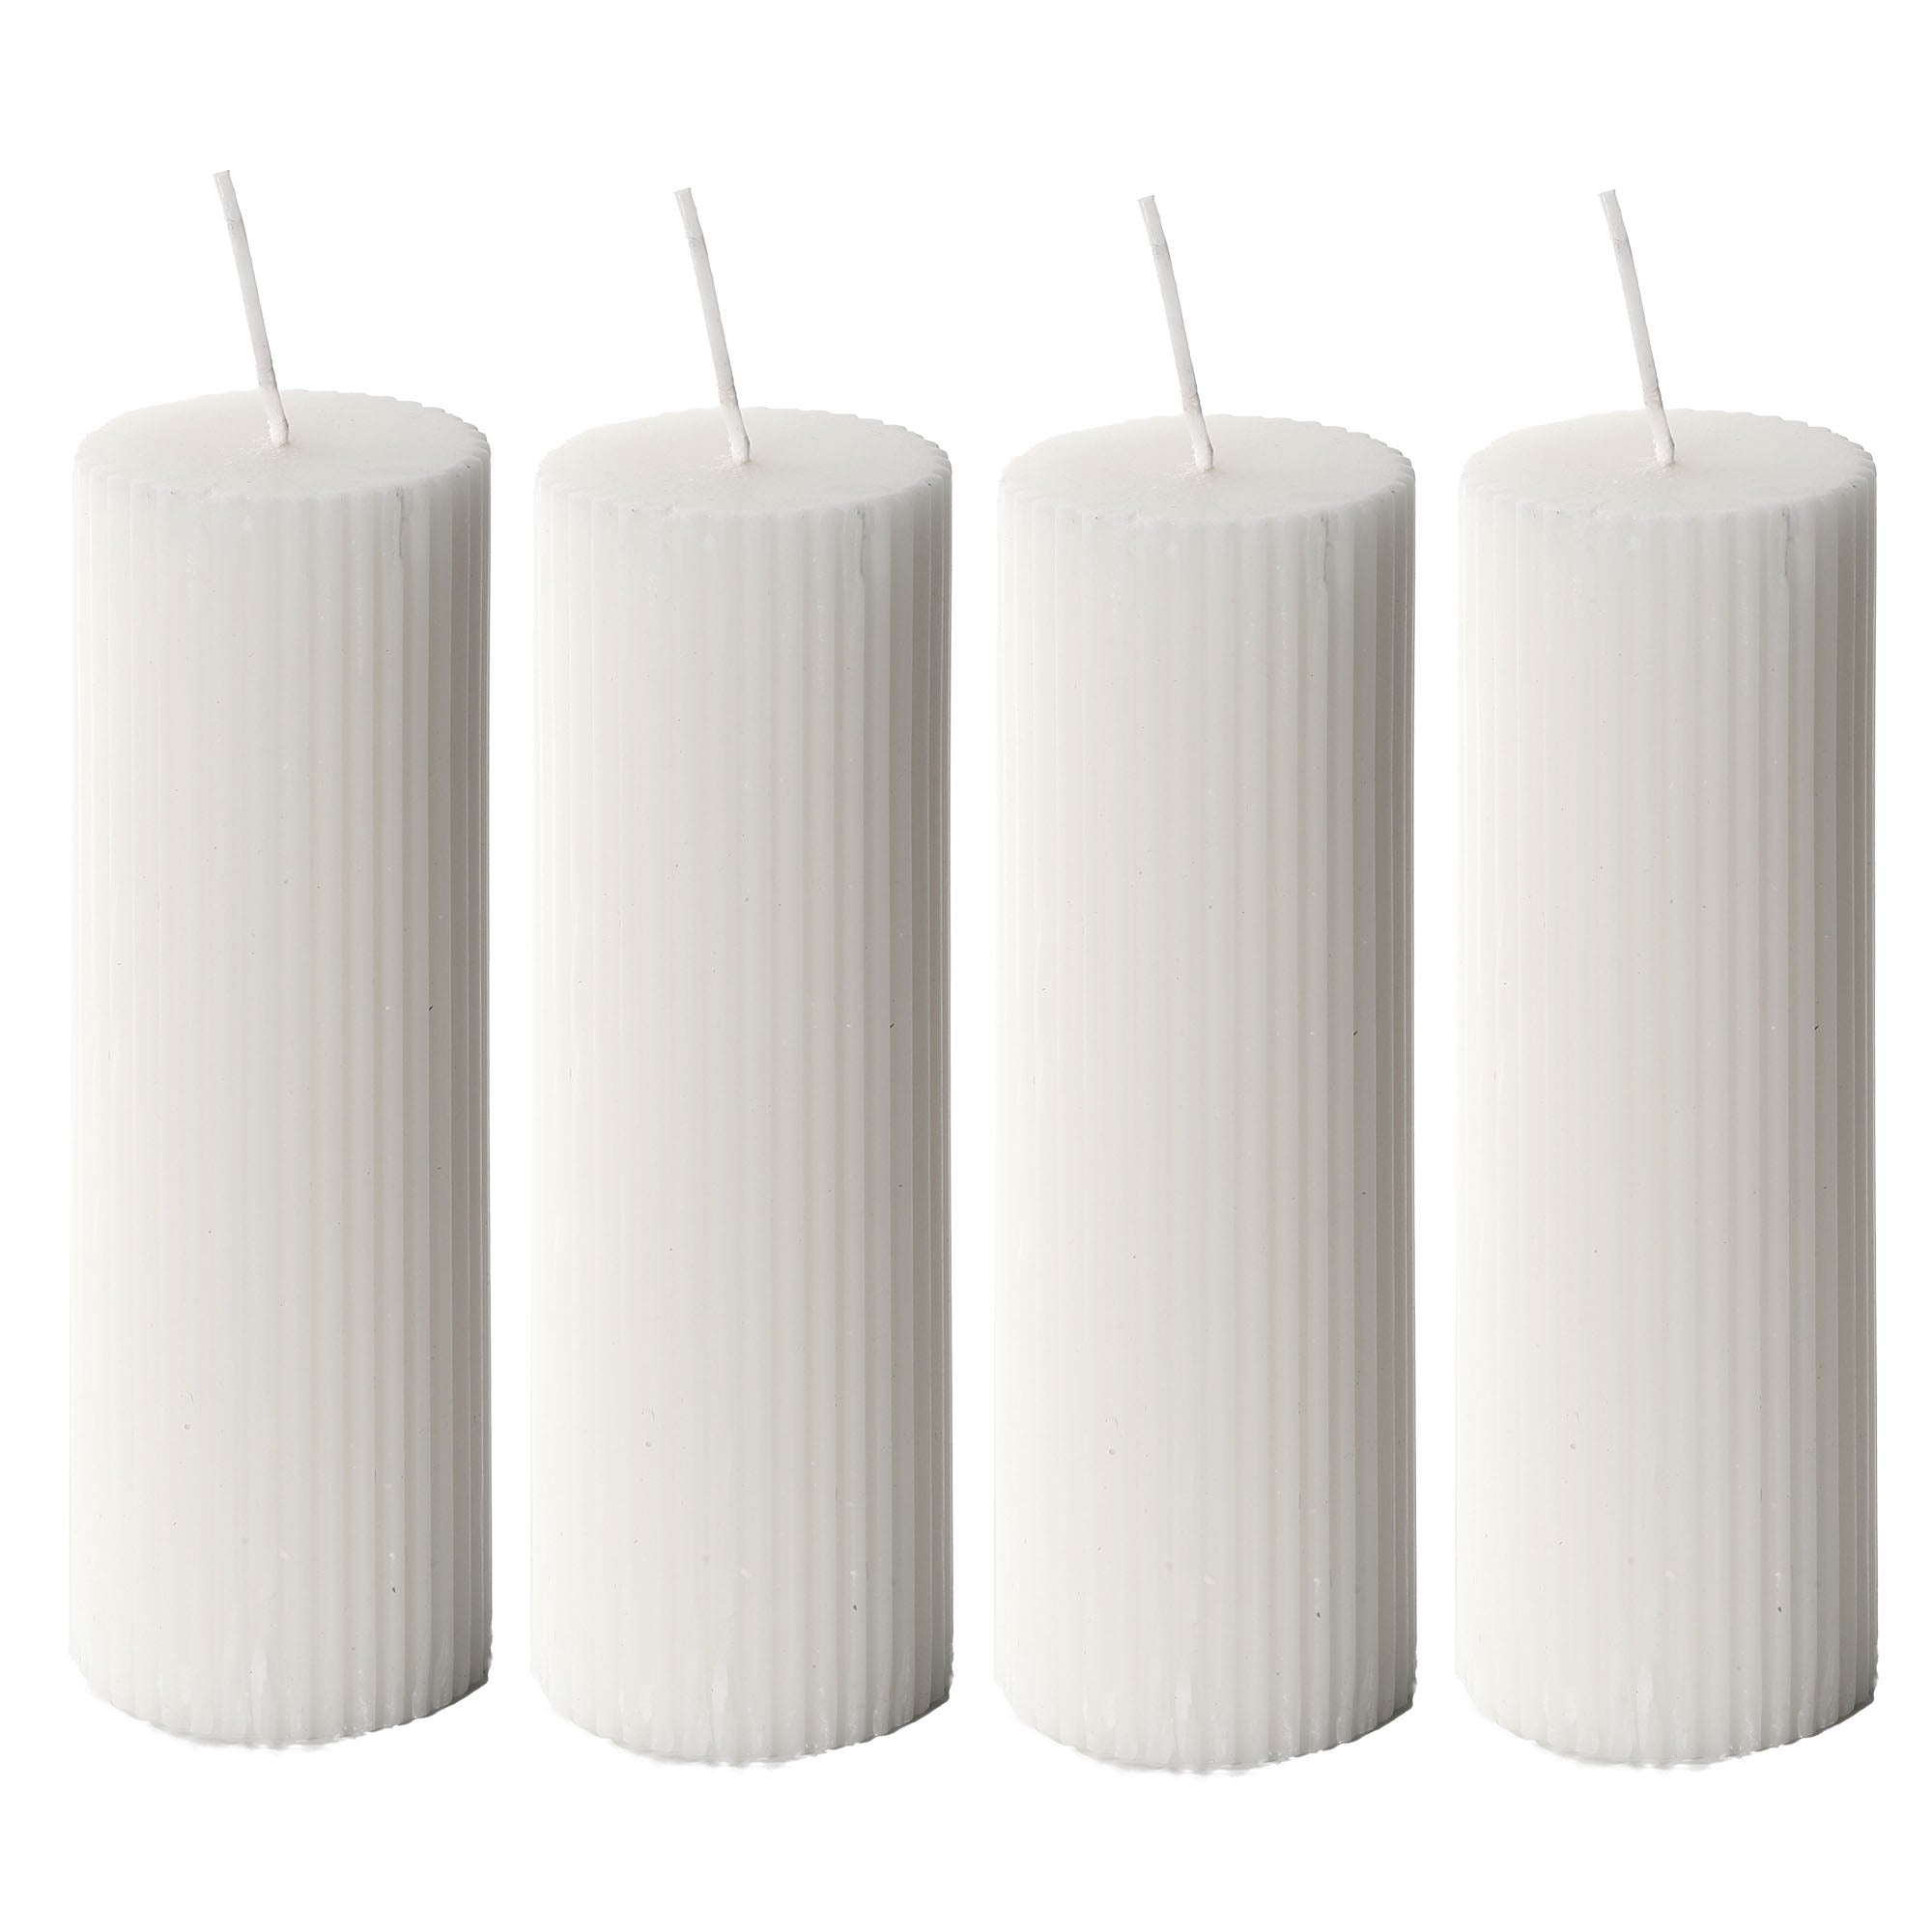 Ribbed Pillar Candles 2x6'' Freesia Scented (4 Packs, White)